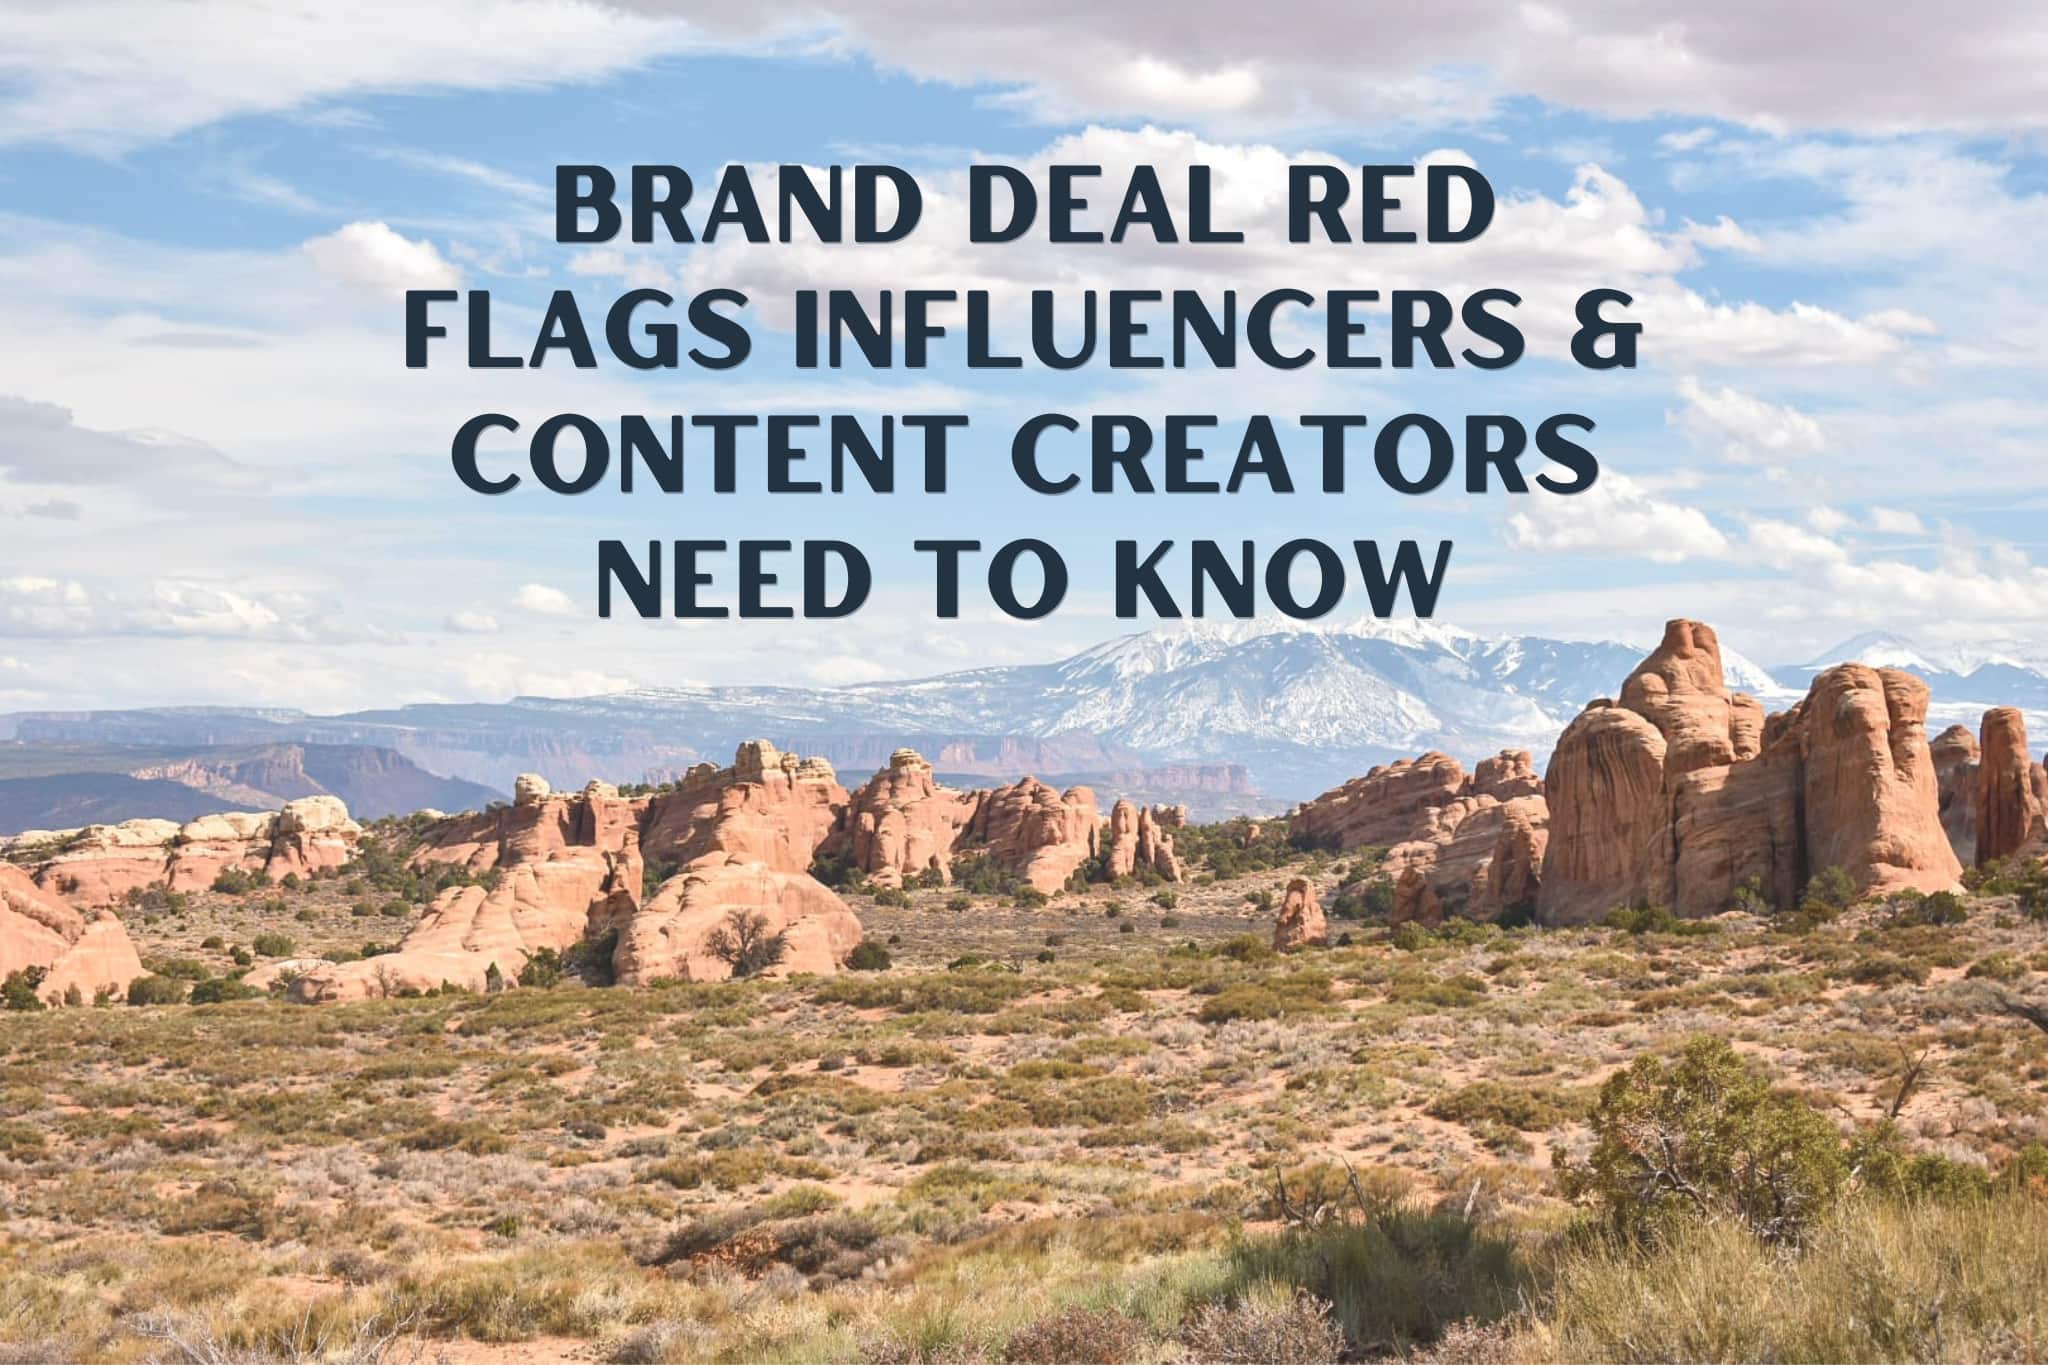 Photo of Devils Garden in Arches National Park with text "brand deal red flags influencers & content creators need to know" on top.